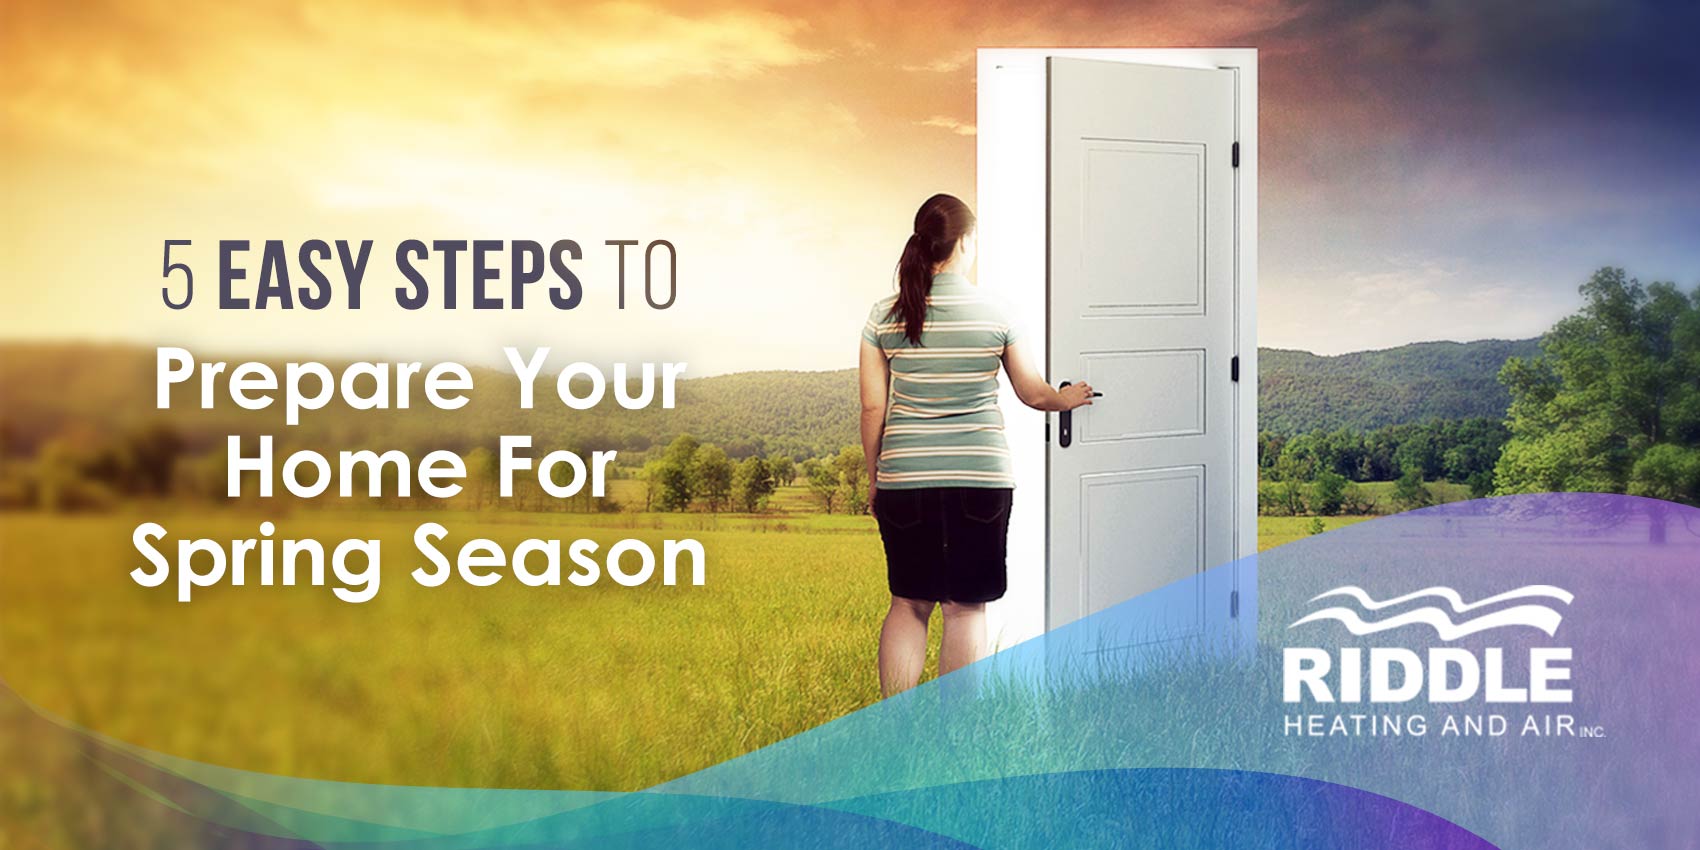 5 Easy Steps to Prepare Your Home For Spring Season